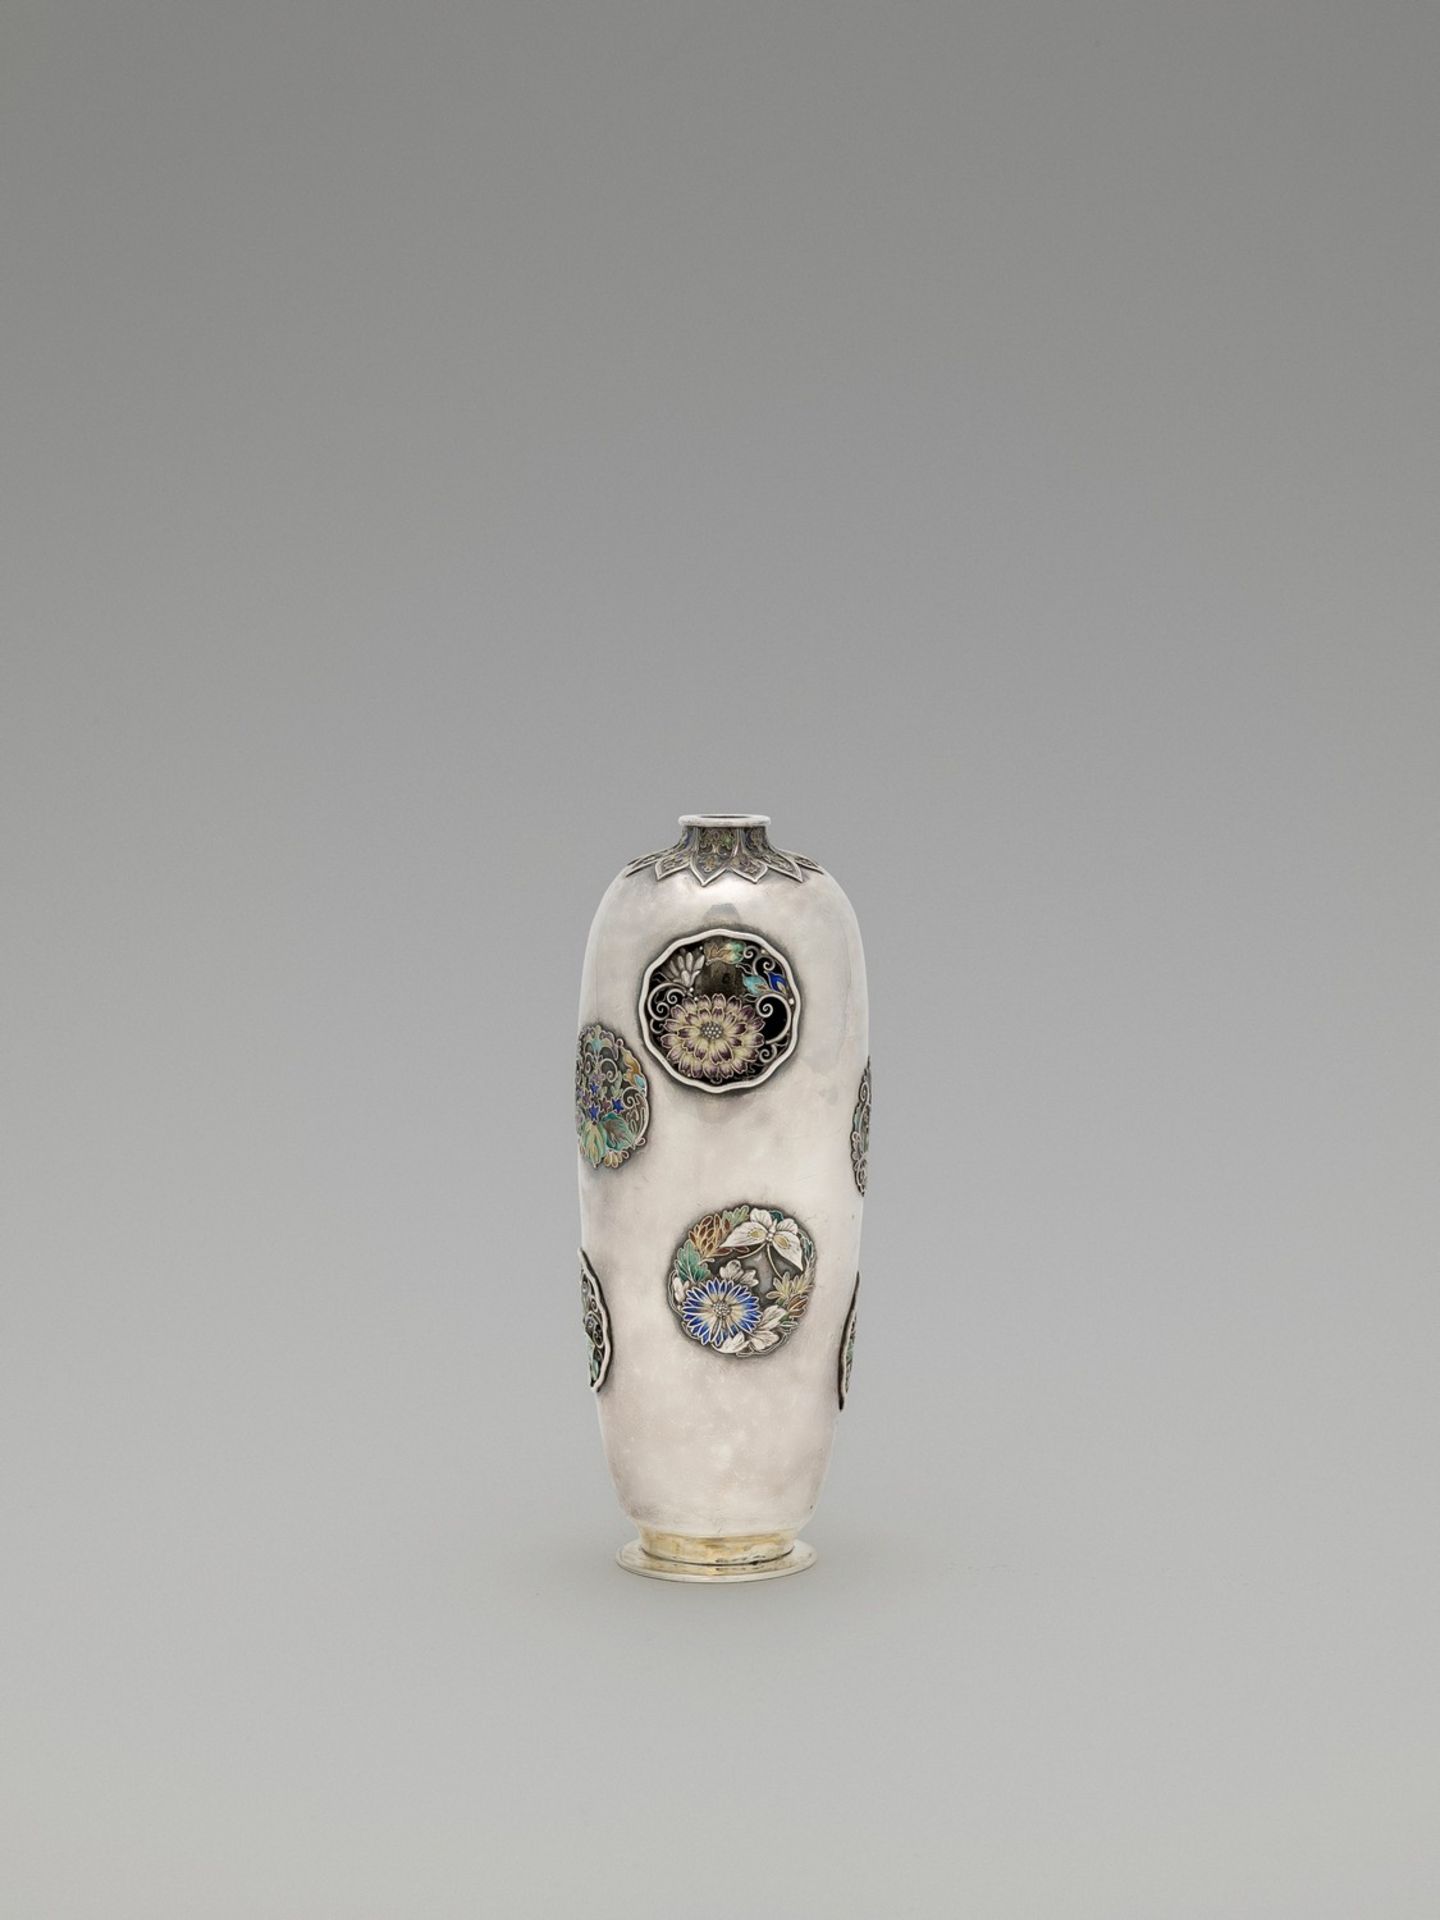 A RARE AND RETICULATED SILVER CLOISONNÉ “VASE WITHIN A VASE” ATTRIBUTED TO HIRATSUKA MOHEI